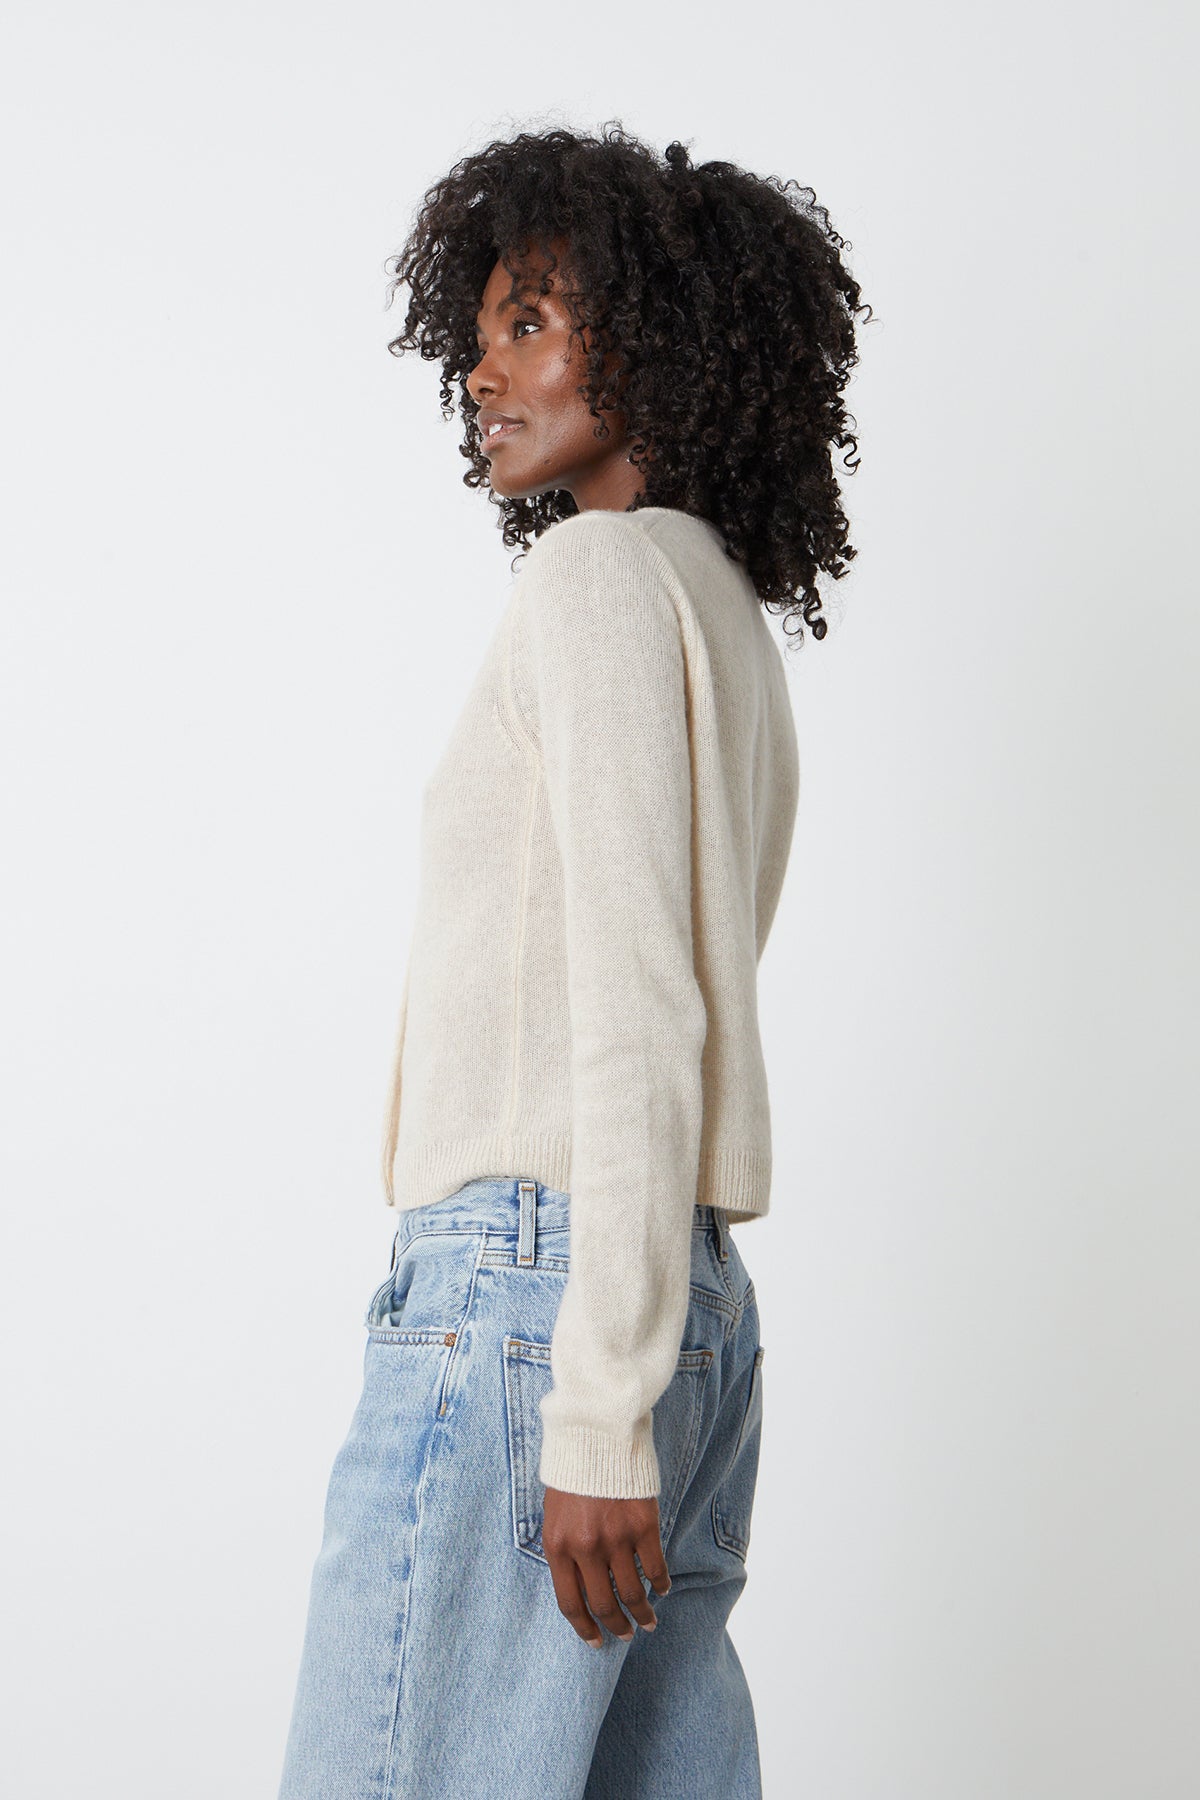 the back view of a woman wearing jeans and a Velvet by Graham & Spencer NANI CASHMERE CARDIGAN sweater.-25916271886529